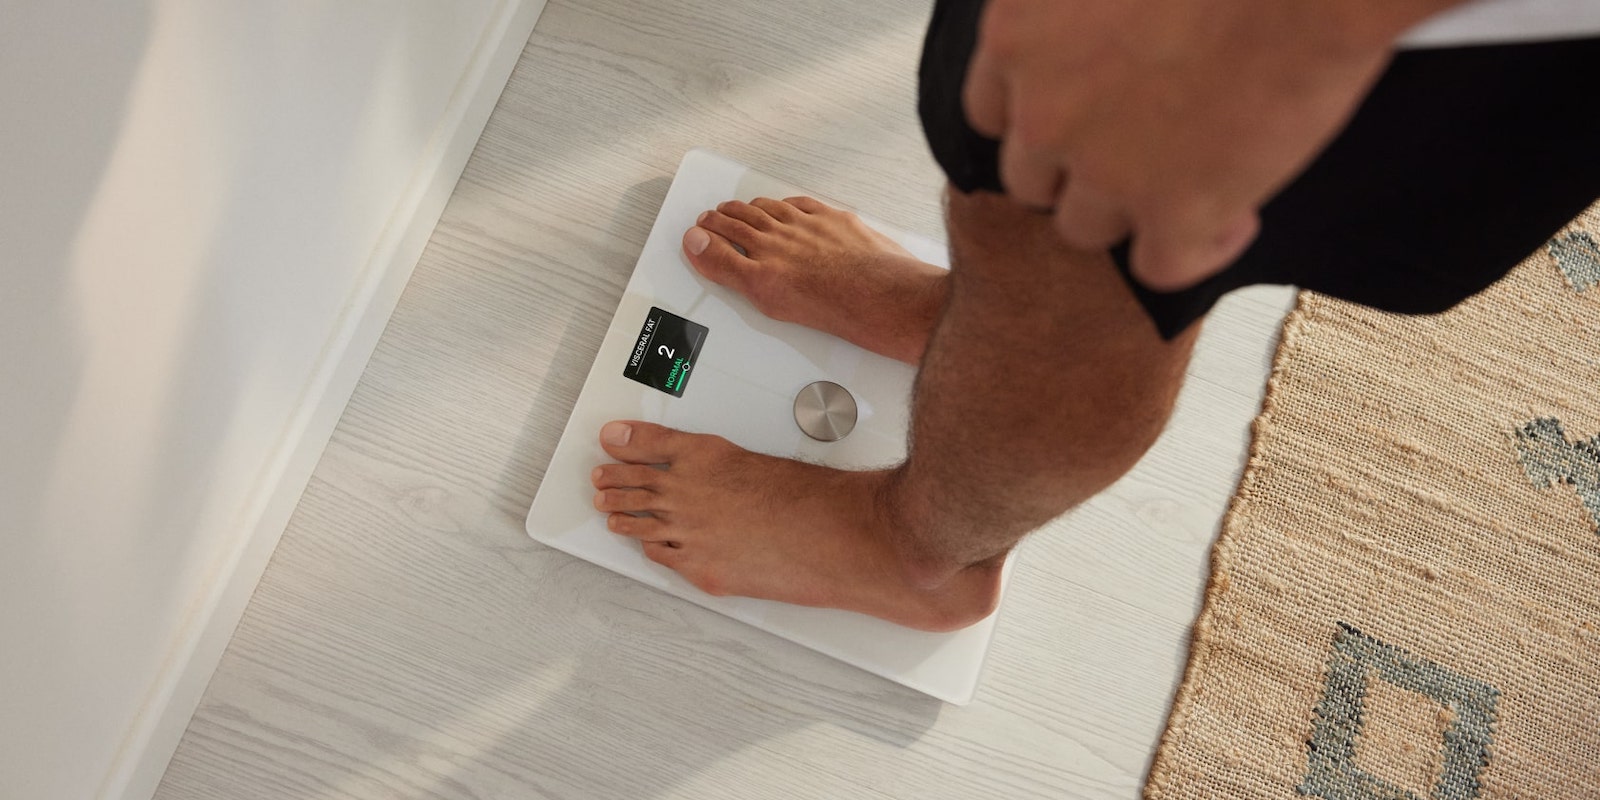 Withings has a new smart scale and 'Health+' fitness subscription platform